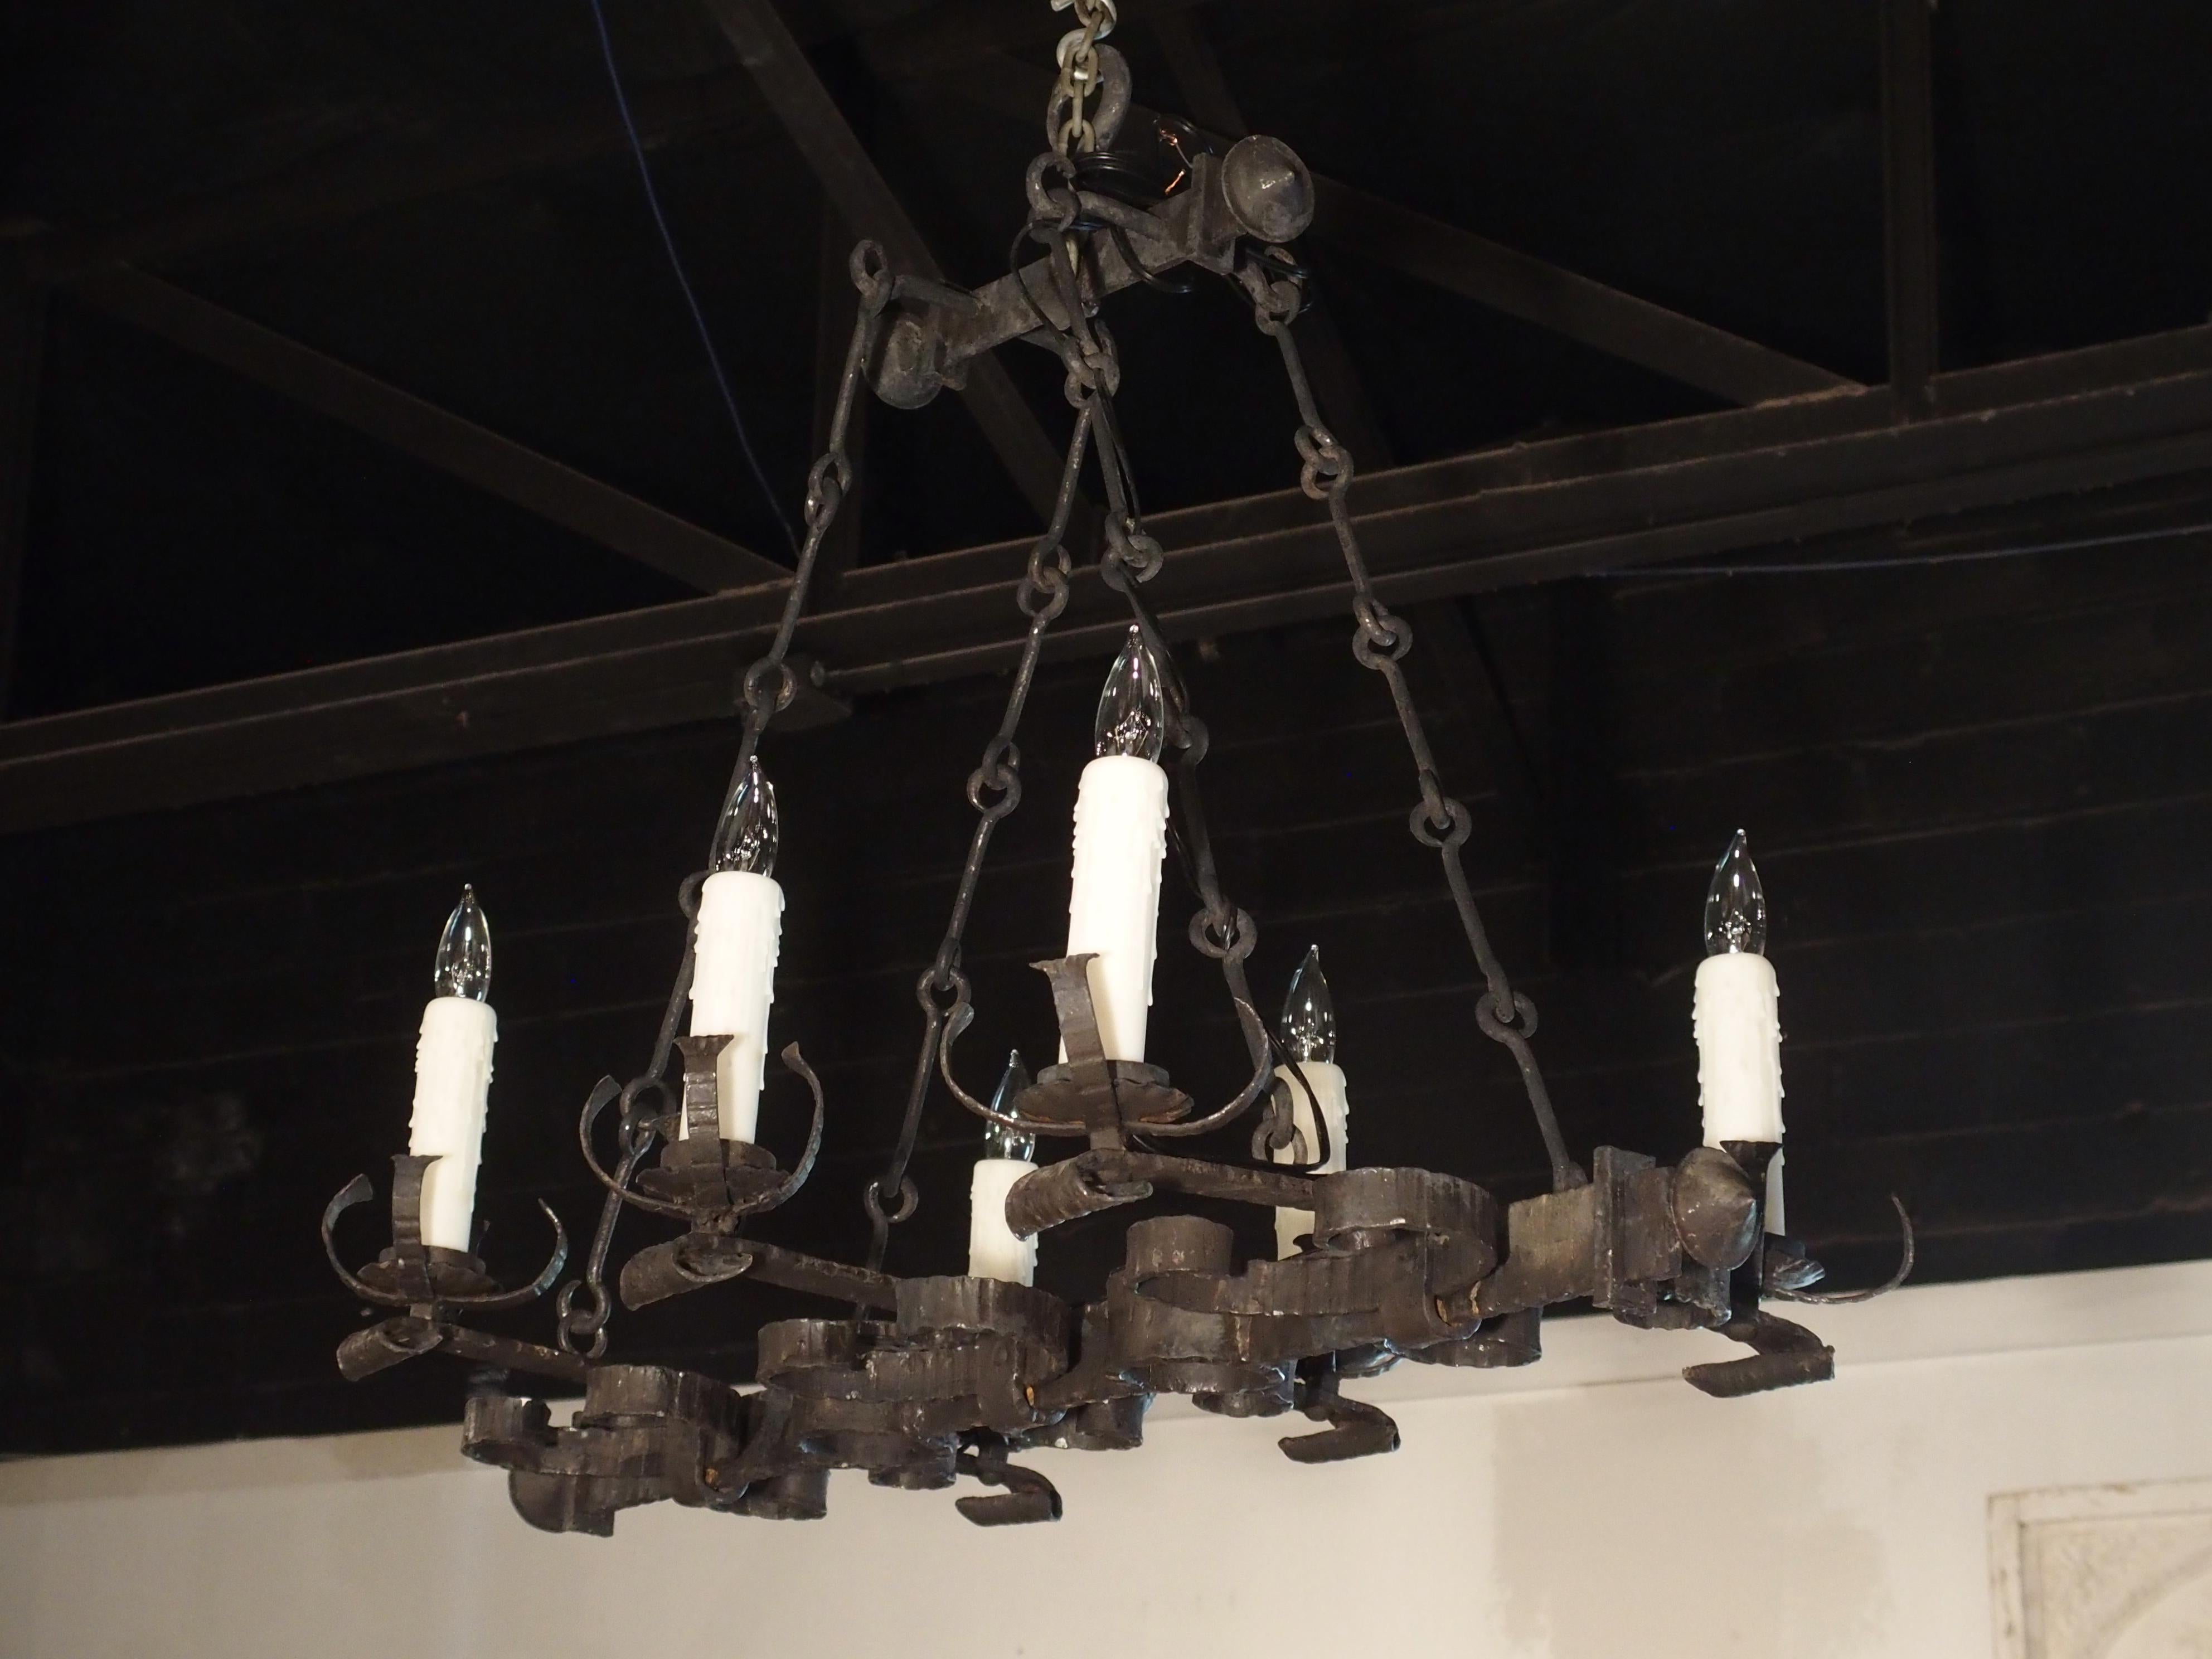 This antique, rectangular French iron chandelier has a myriad of interesting hand forged shapes made from thick iron ornamentation. There are linear ridges hammered into the iron bars which are offset by circular motifs. There are C-scroll motifs,